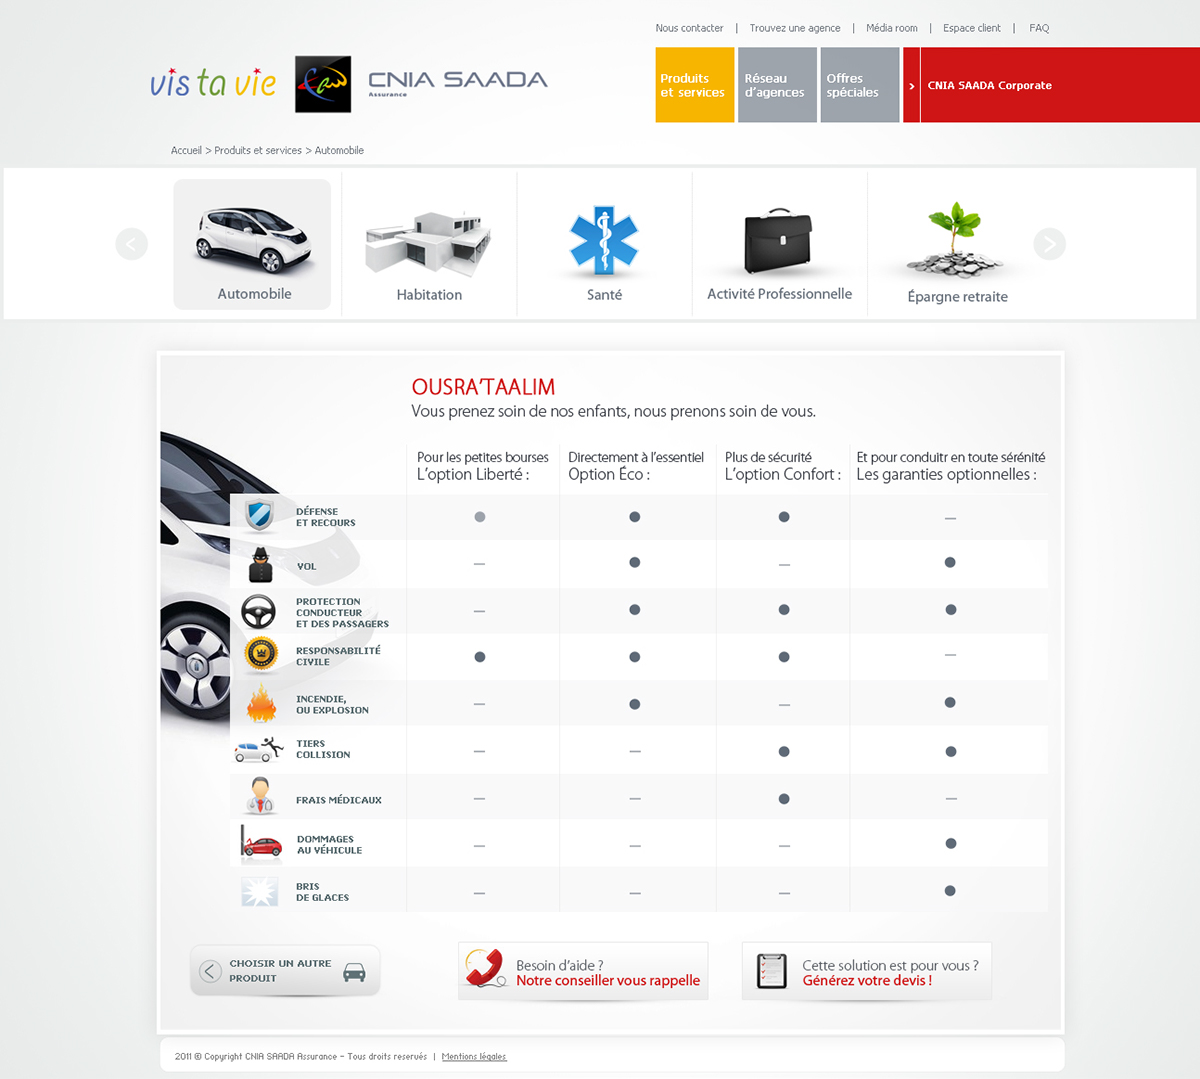 insurance cniasaada insurance morocco Big Background Ecommerce online marchand